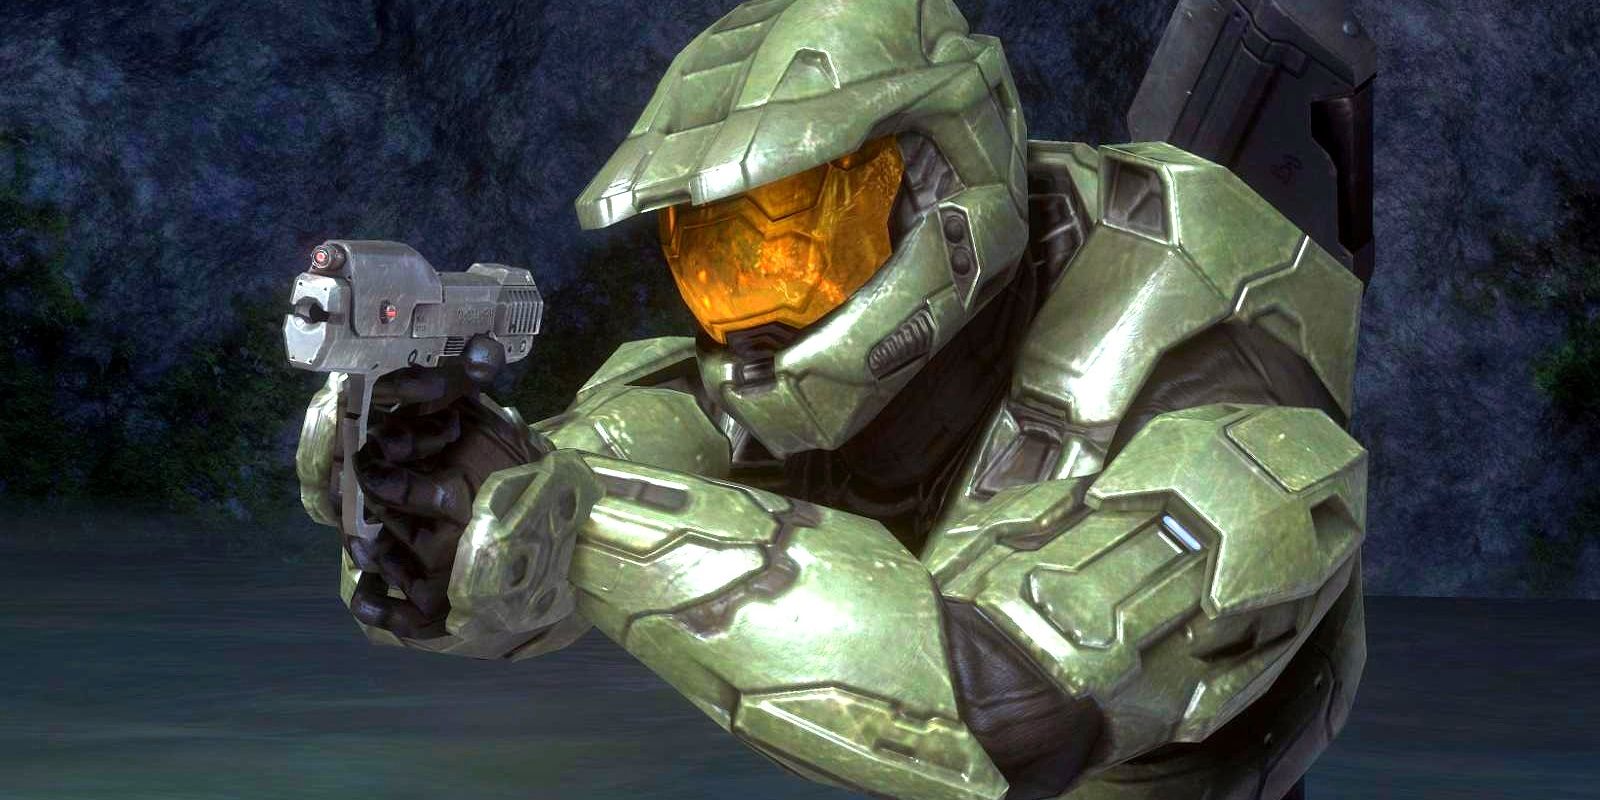 Master chief holds a pistol in Halo